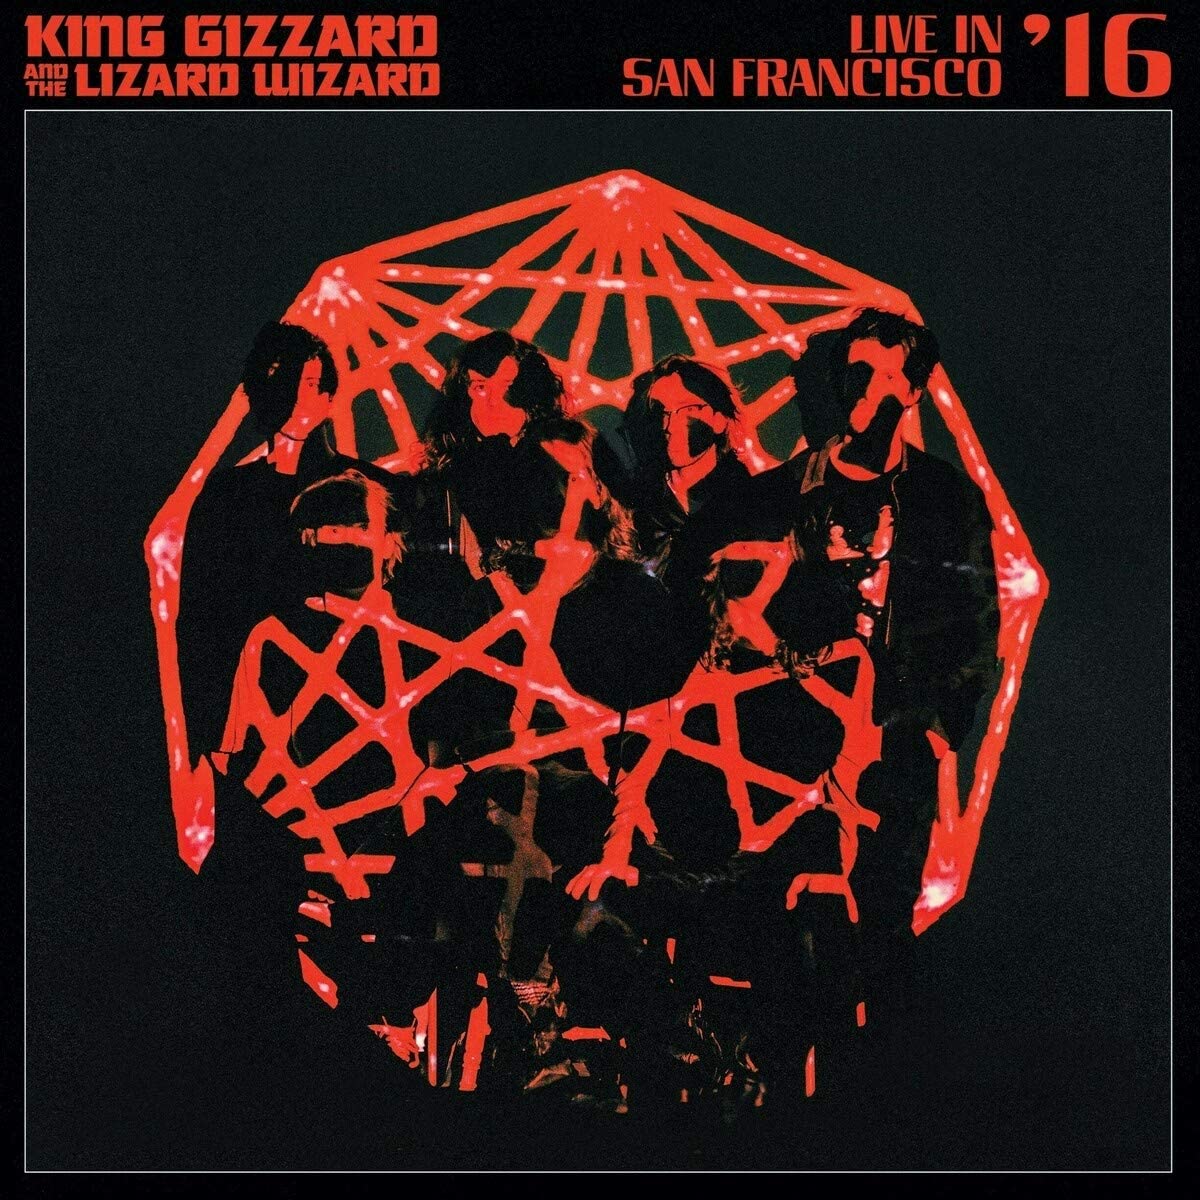 King Gizzard And The Lizard Wizard - Live in San Francisco '16 - 2CD